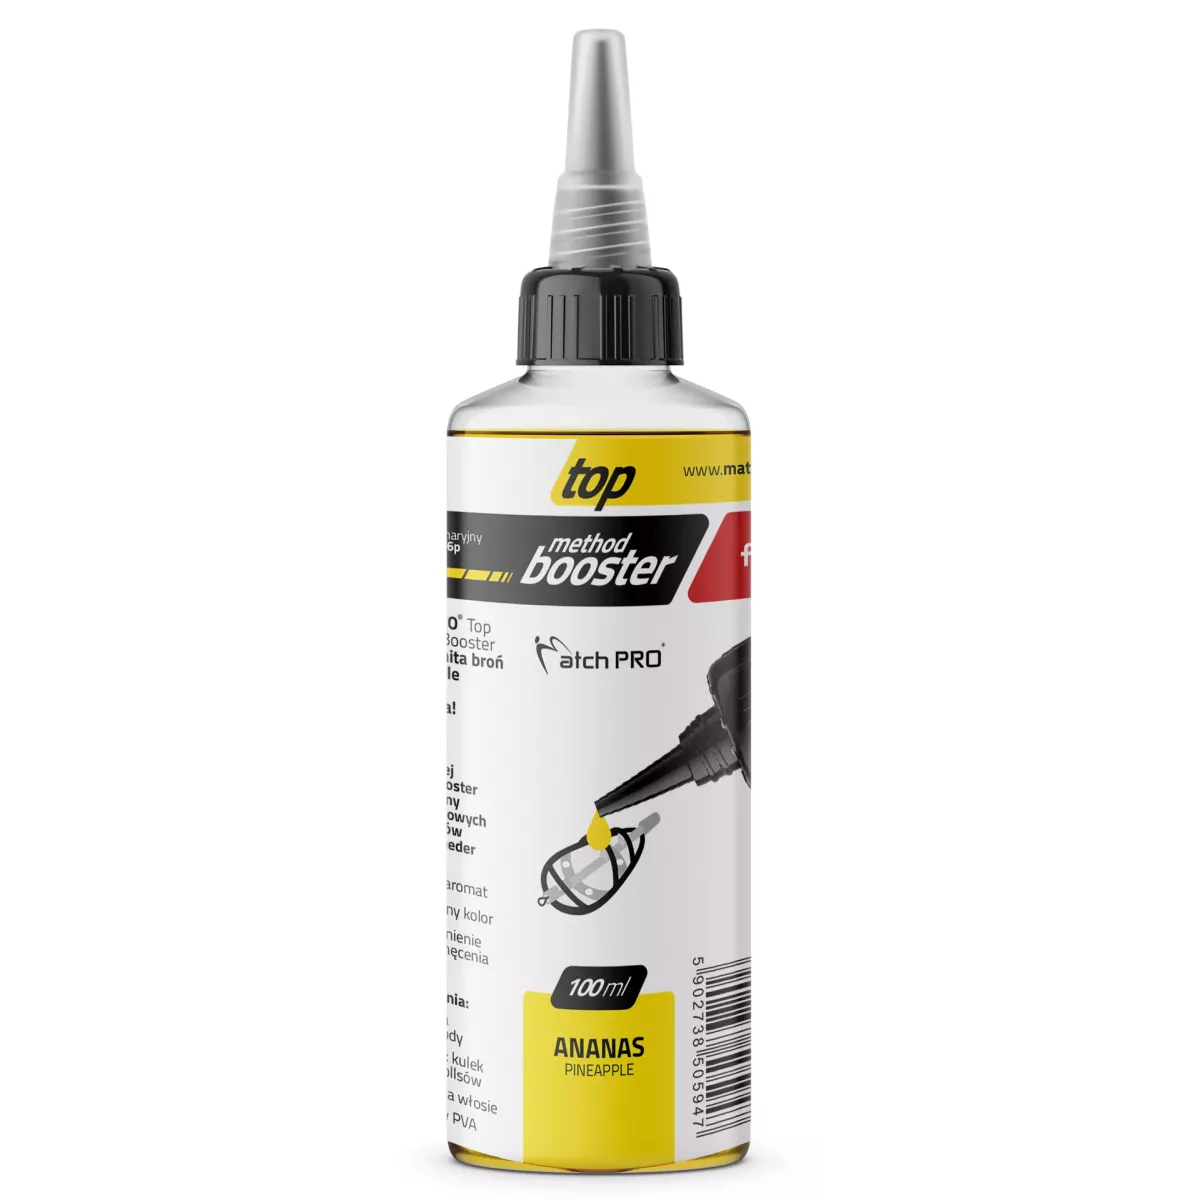 Booster MatchPro TOP Method Booster 100ml - ANANAS